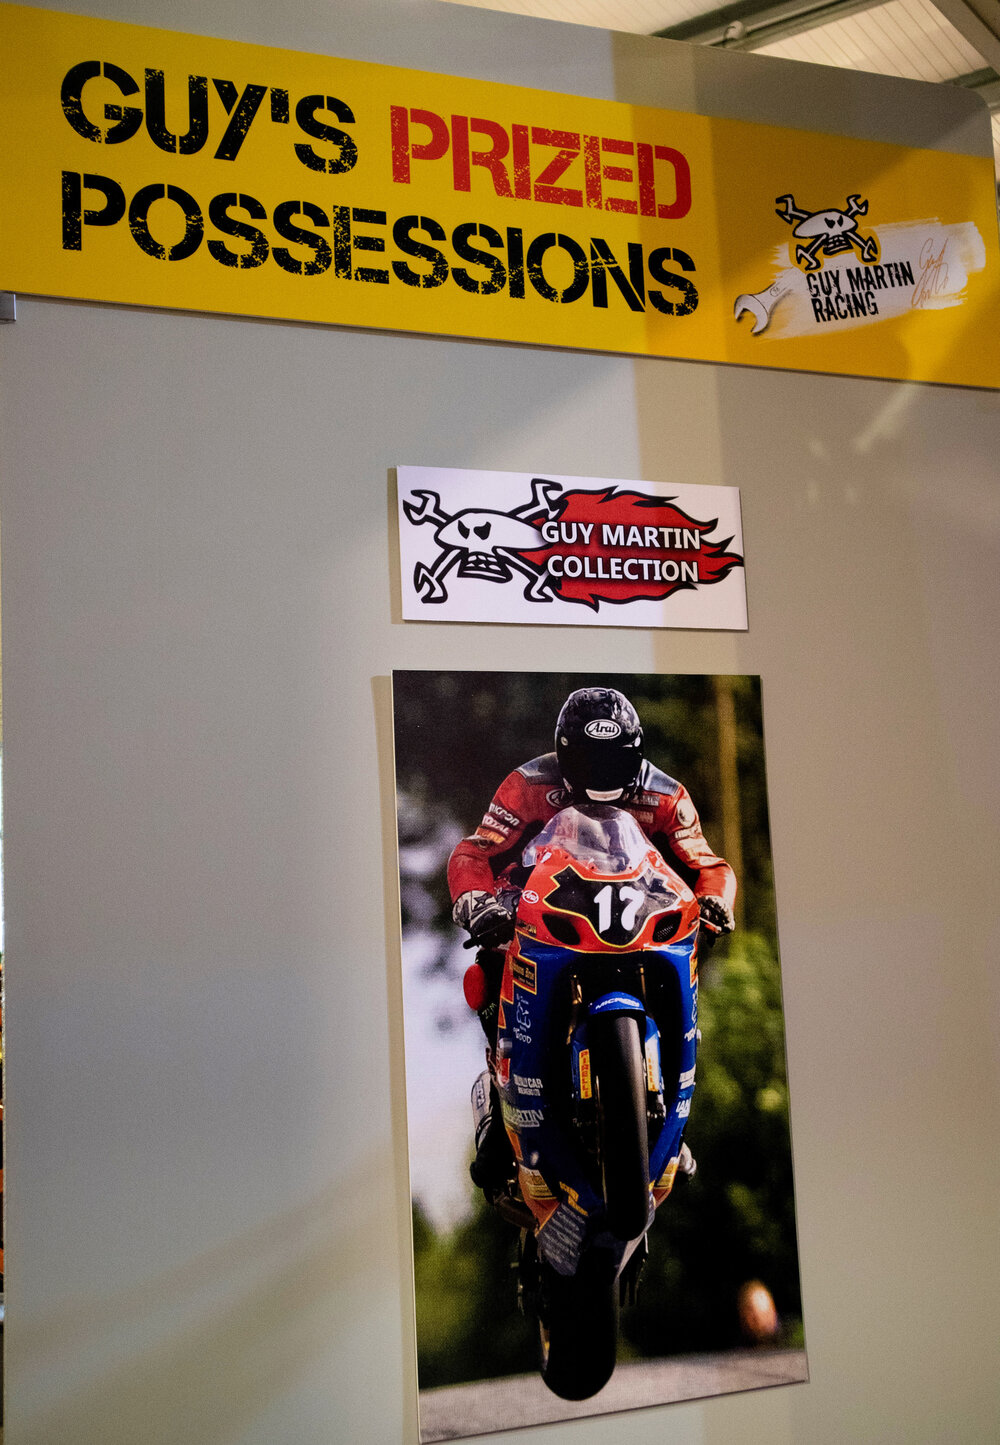 Ride the miles Grampian TRansport Museum Guy Martin Collection.jpg